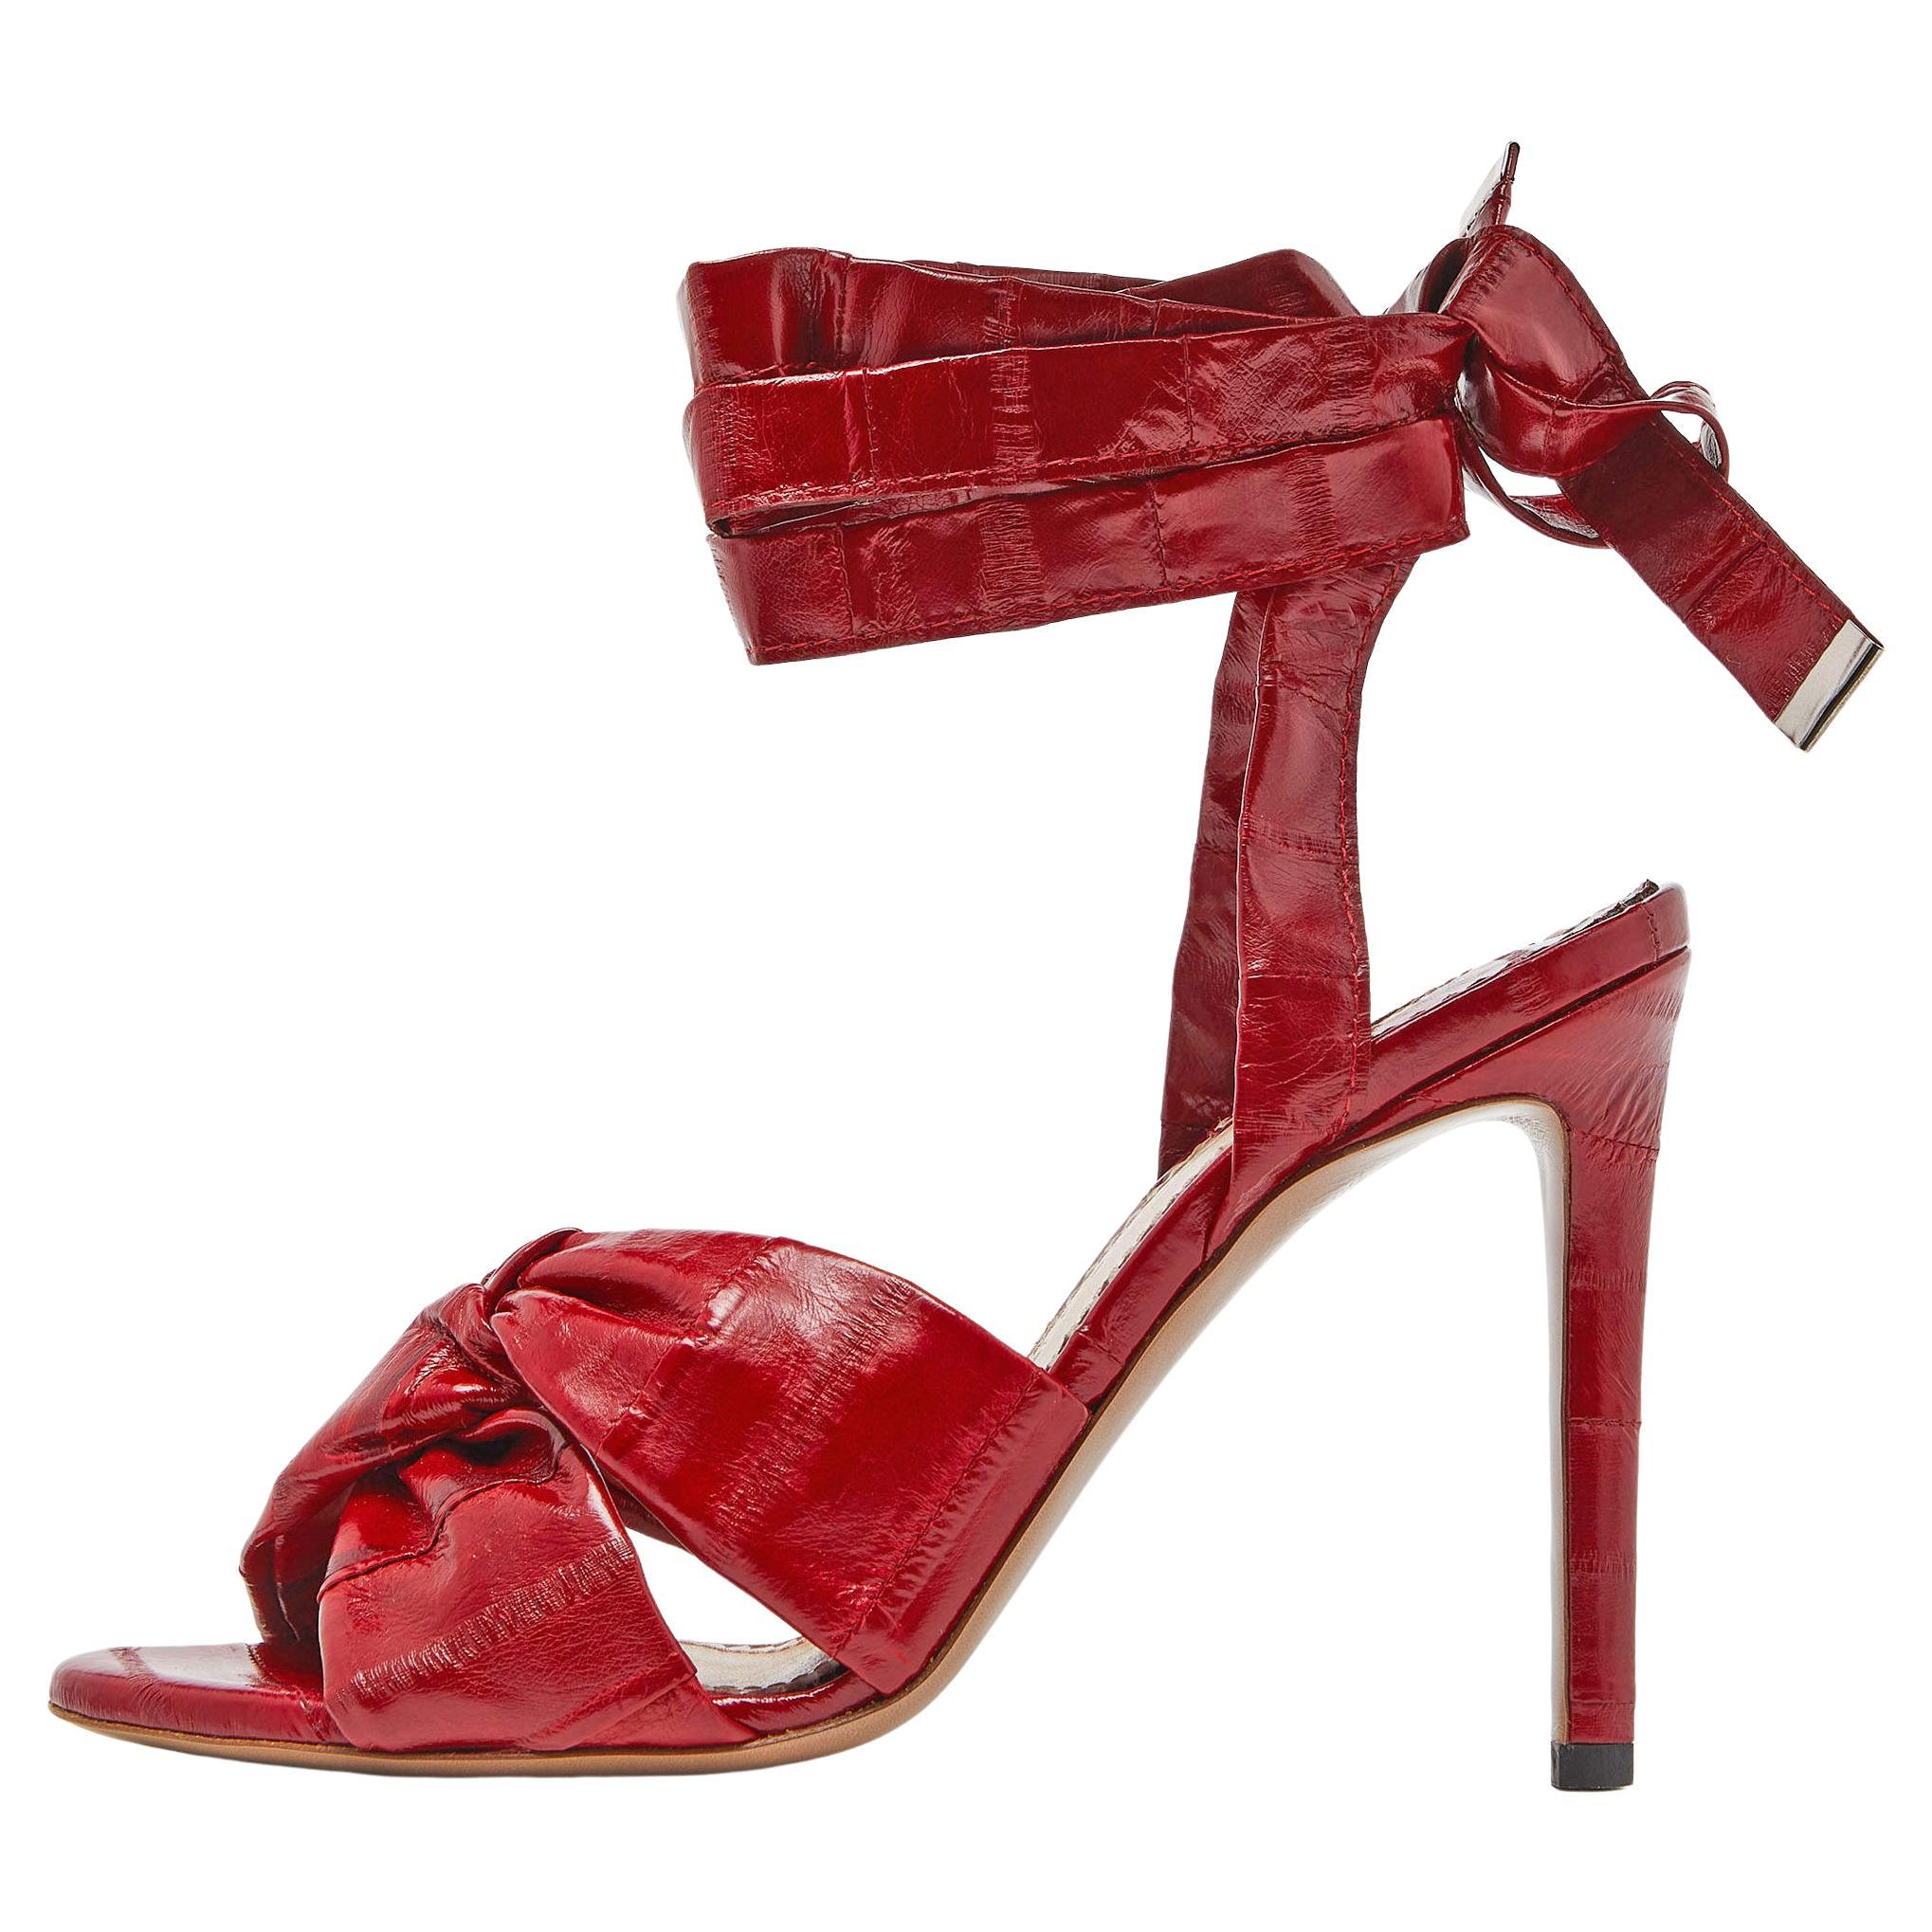 Altuzarra Red Eel Leather 'Zuni' Knotted Sandals Size 35 For Sale